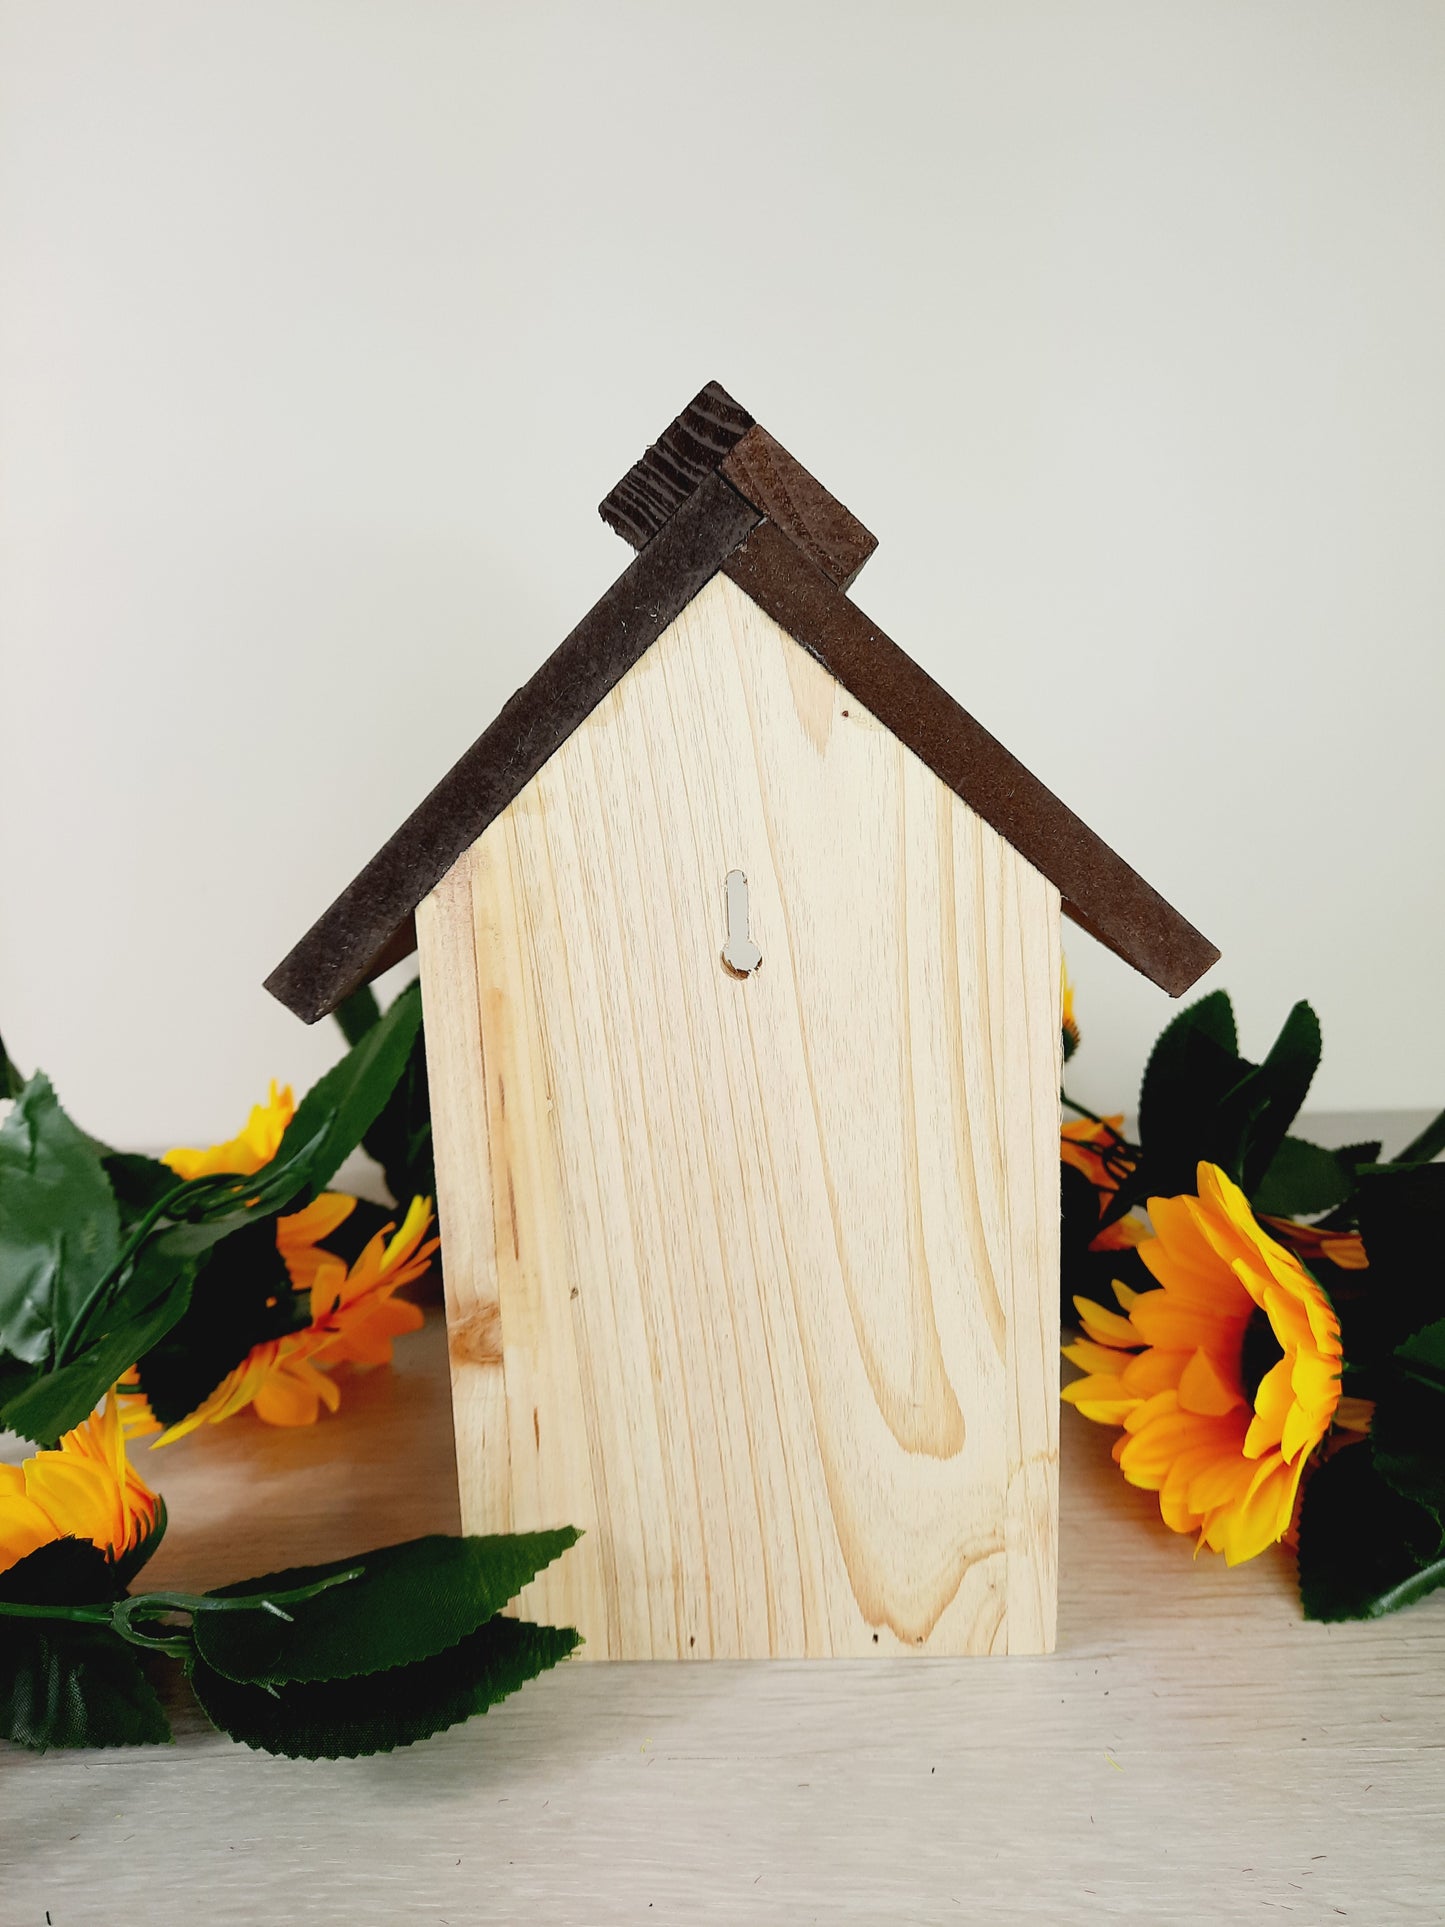 Back side of the bird nesting box with faux sunflower surrounding it as props.